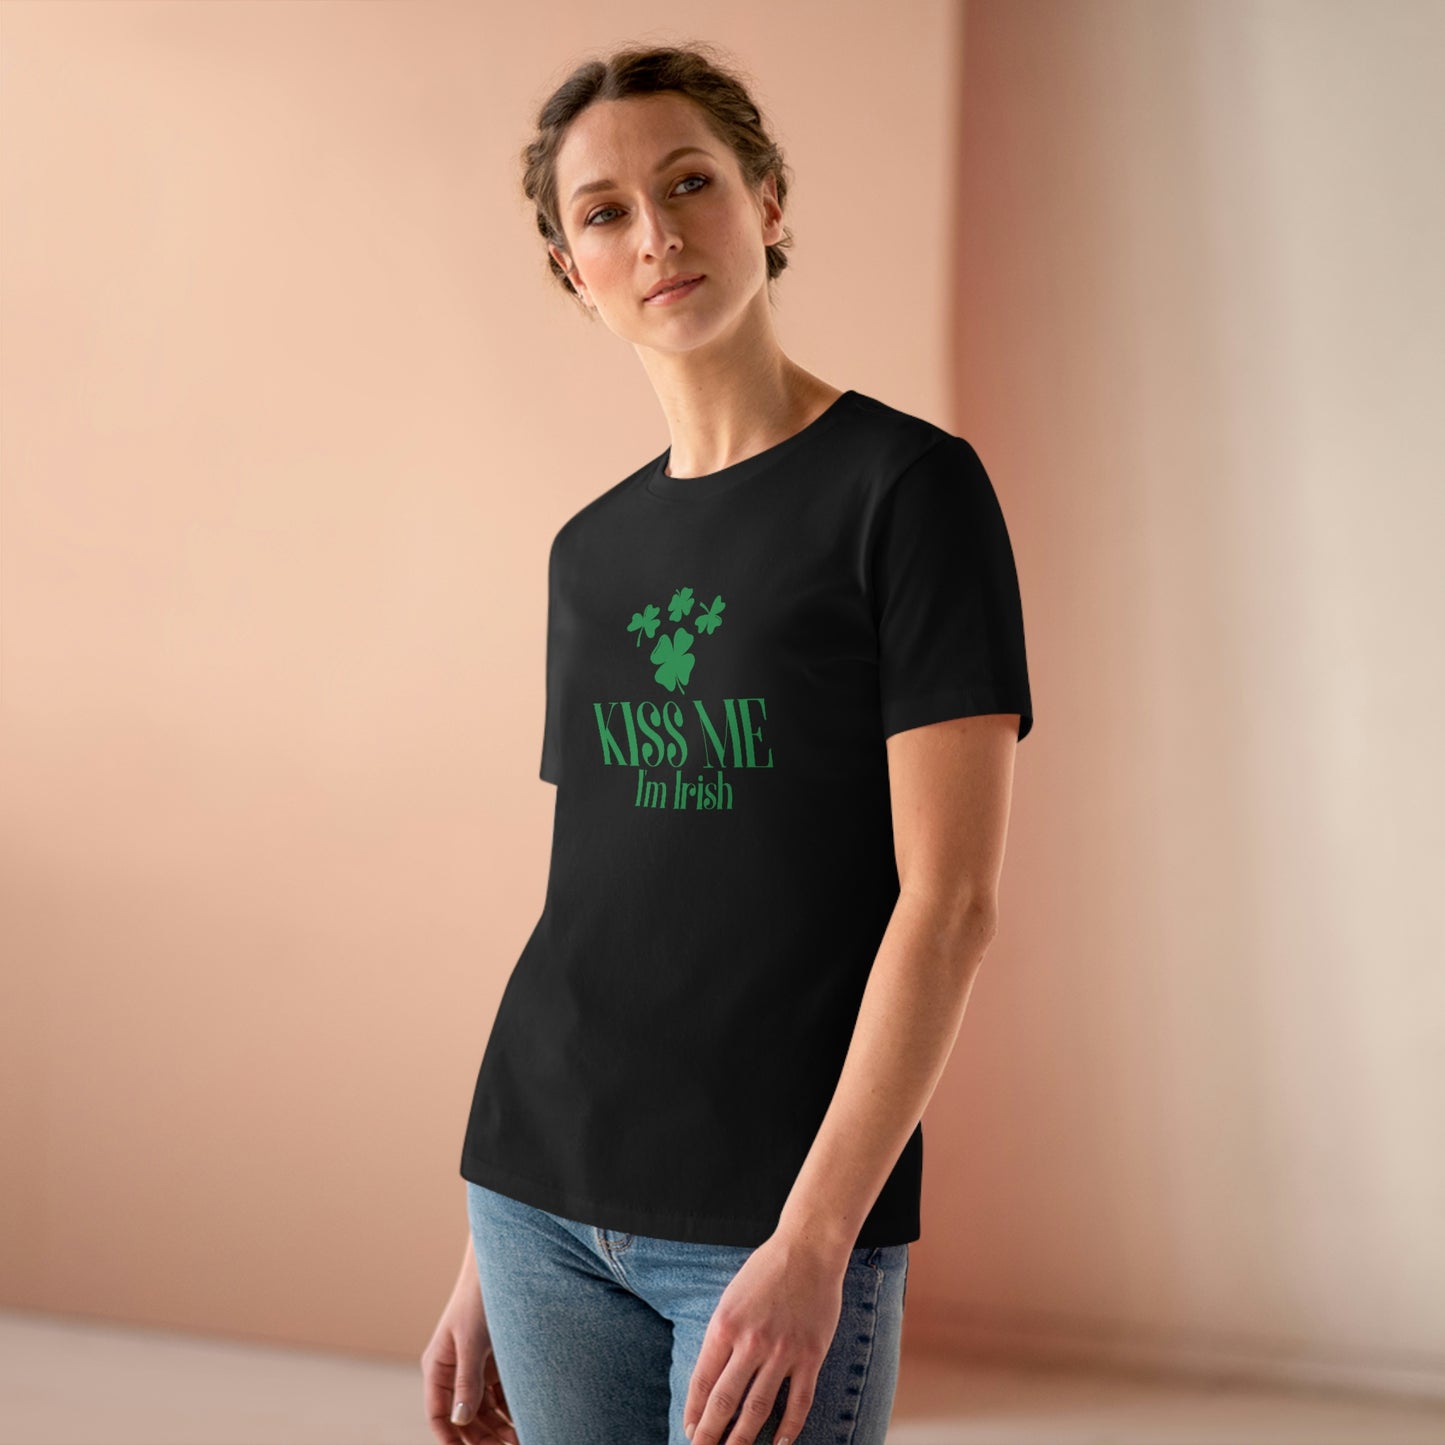 Mock up of the black t-shirt worn by a woman